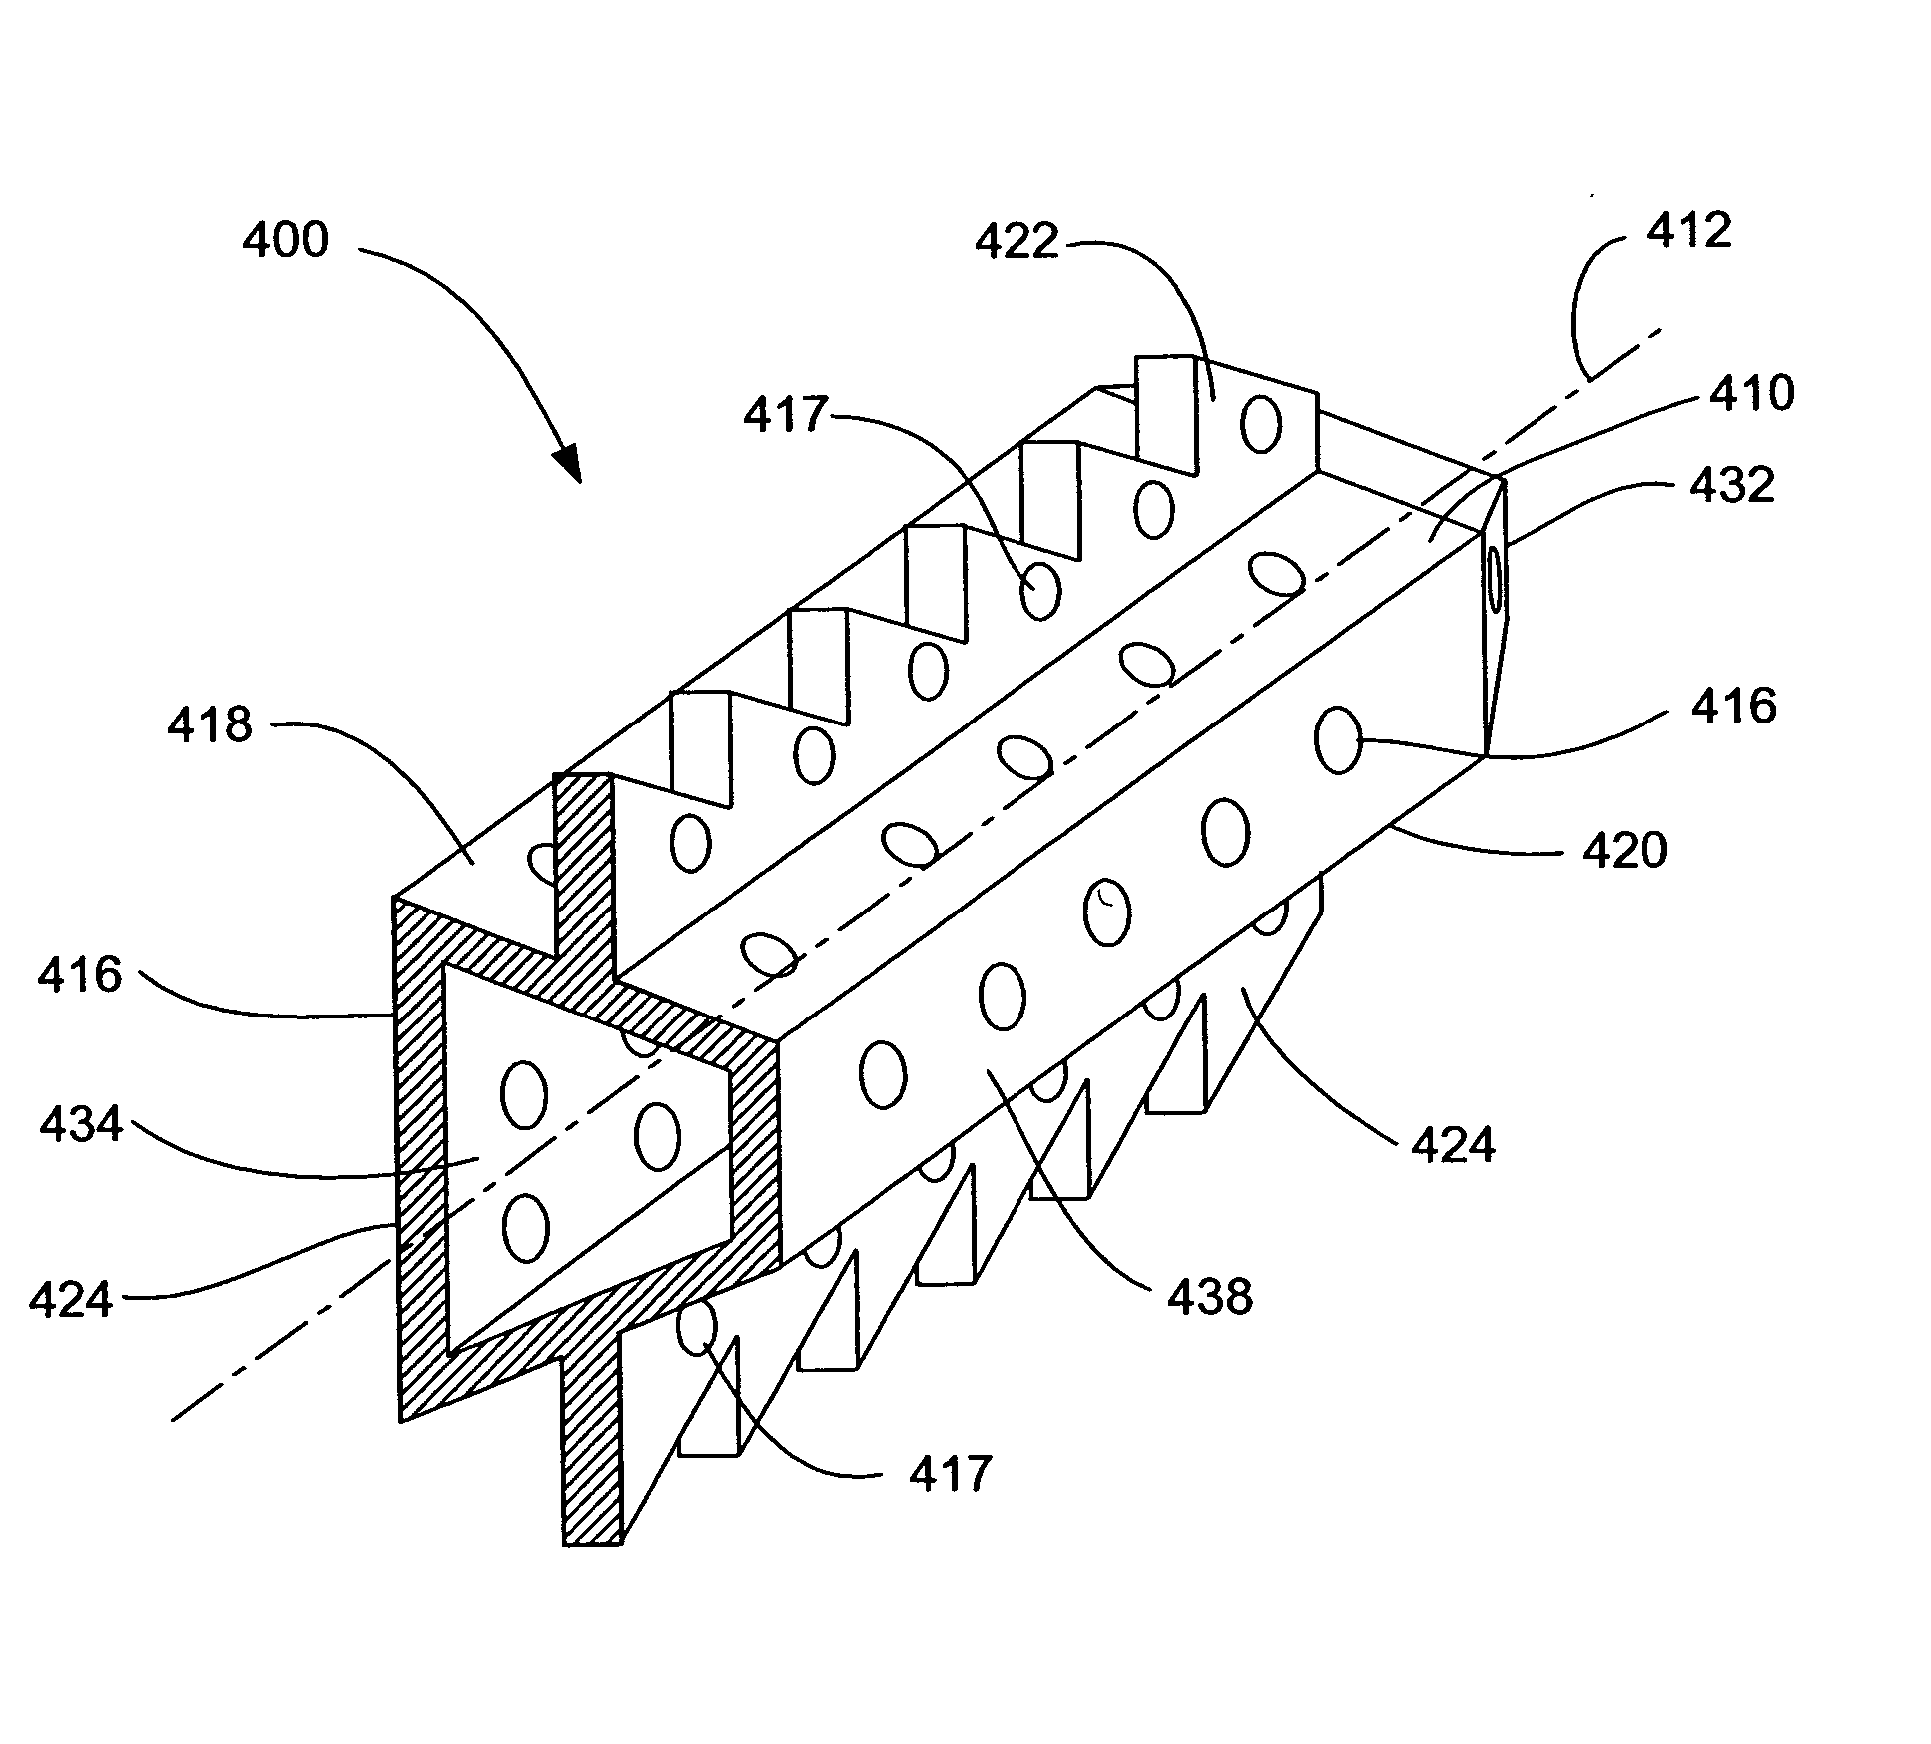 Intervertebral body fusion cage with keels and implantation method